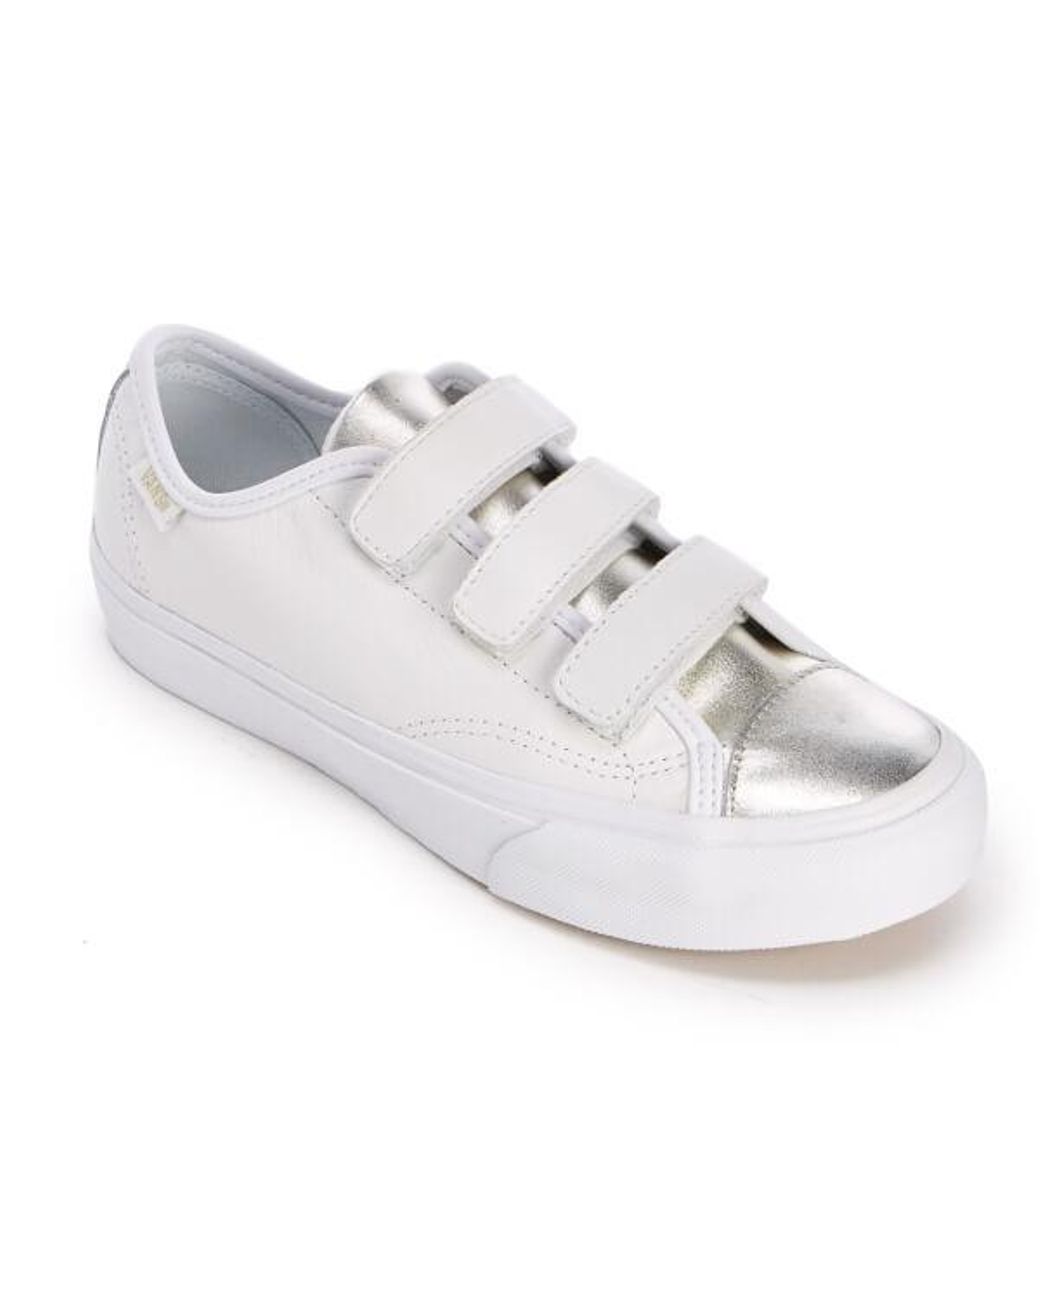 Vans Women's Prison Issue 2 Tone Leather Double Velcro Trainers in White |  Lyst